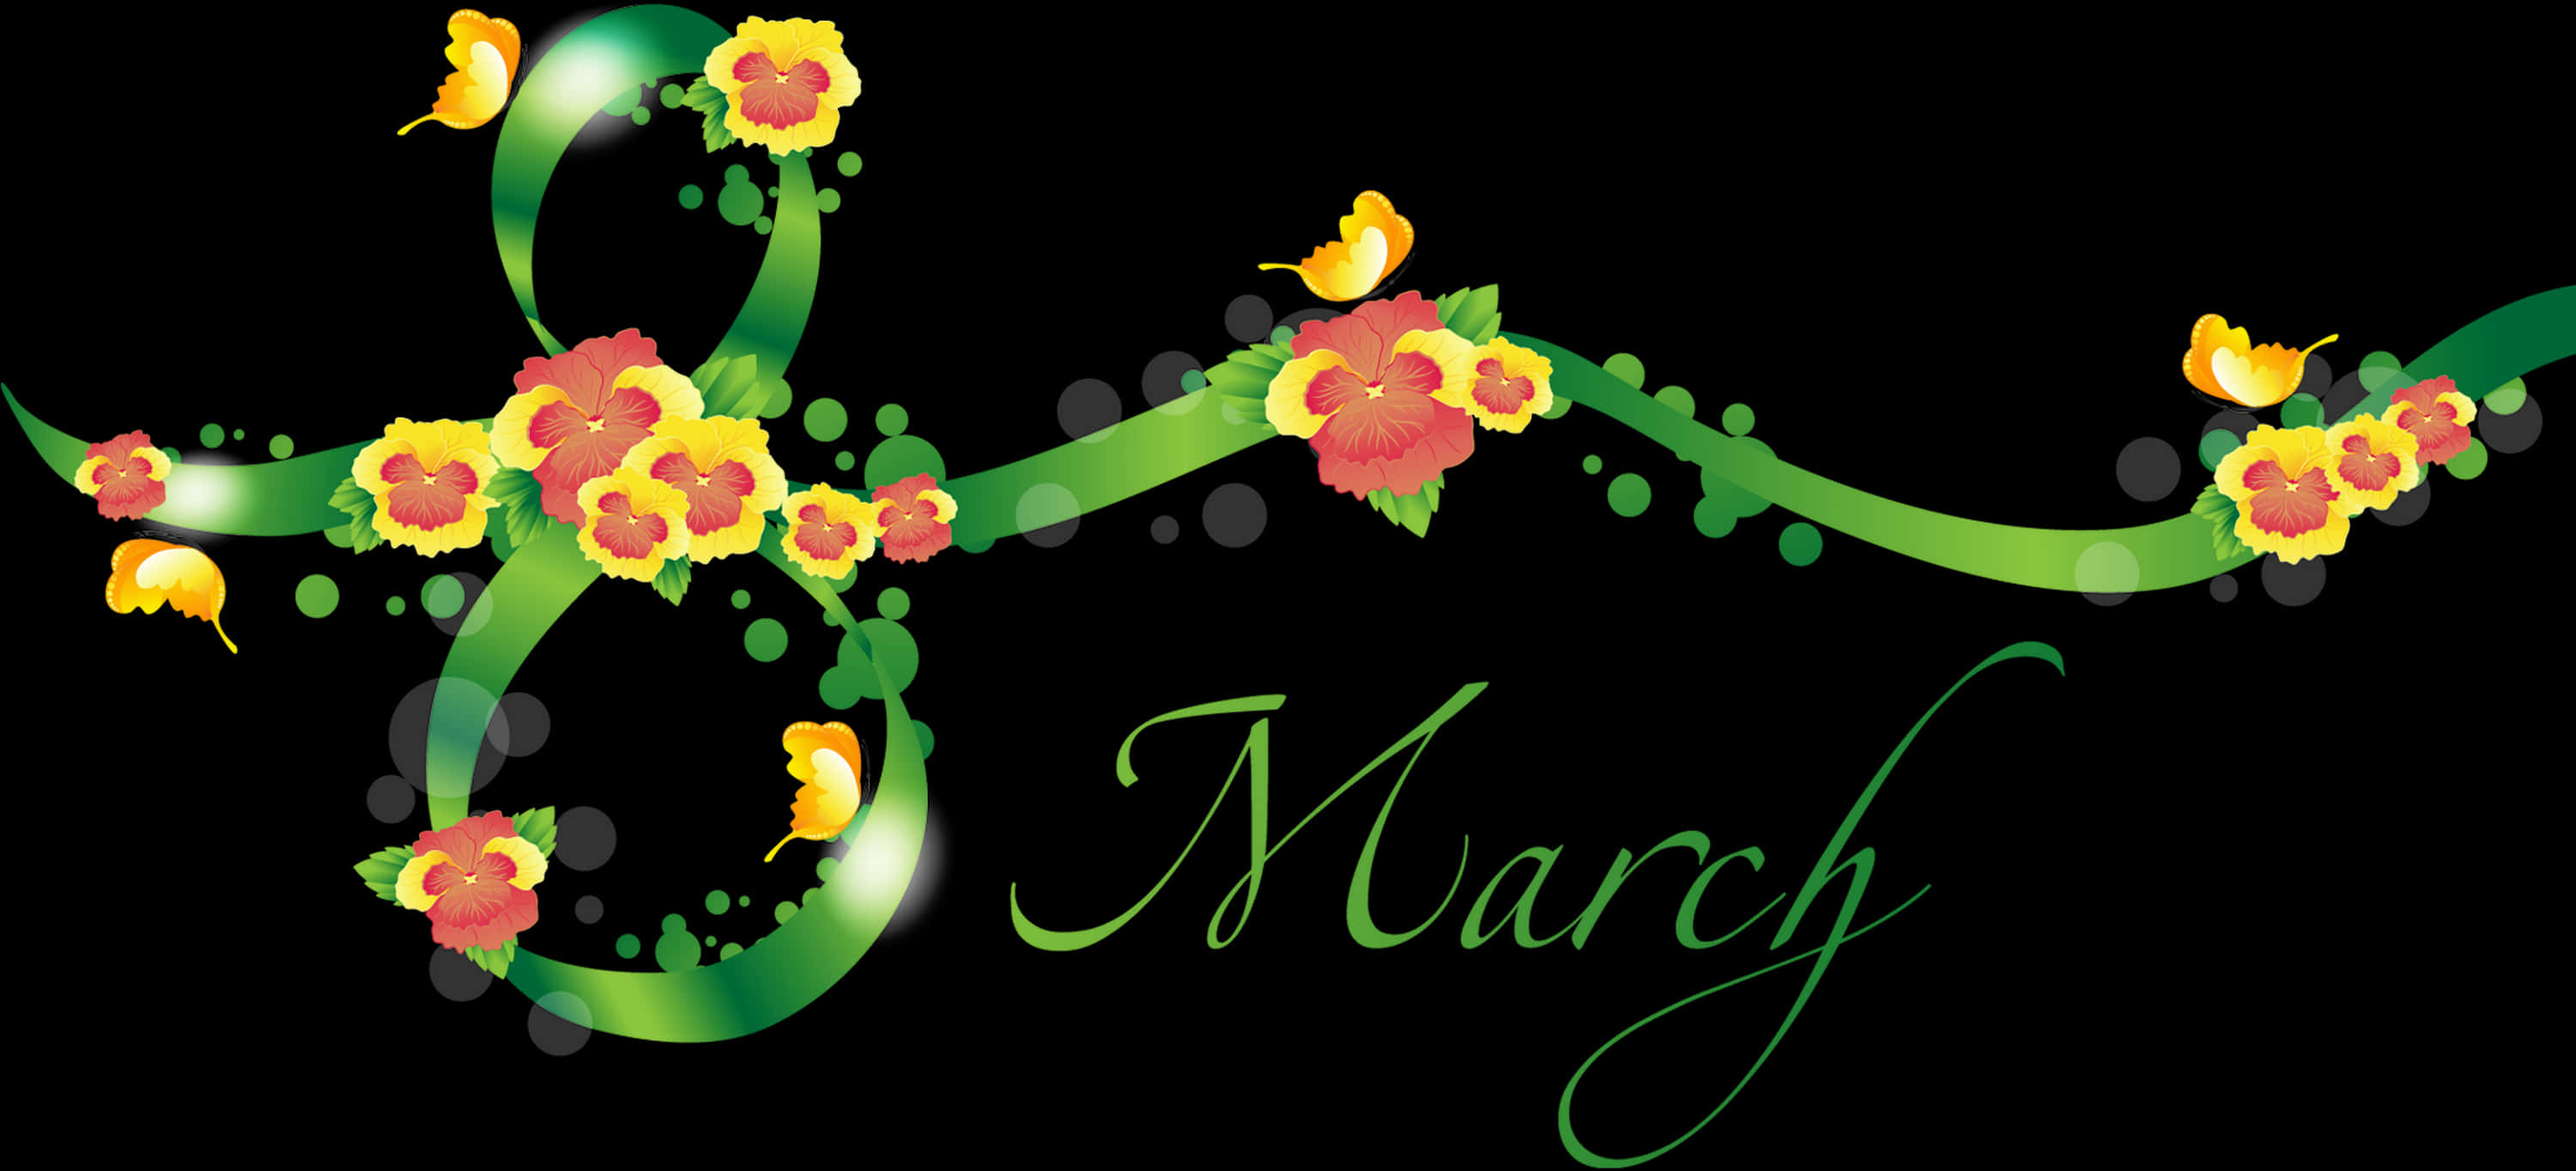 International Womens Day March8 Floral Graphic PNG